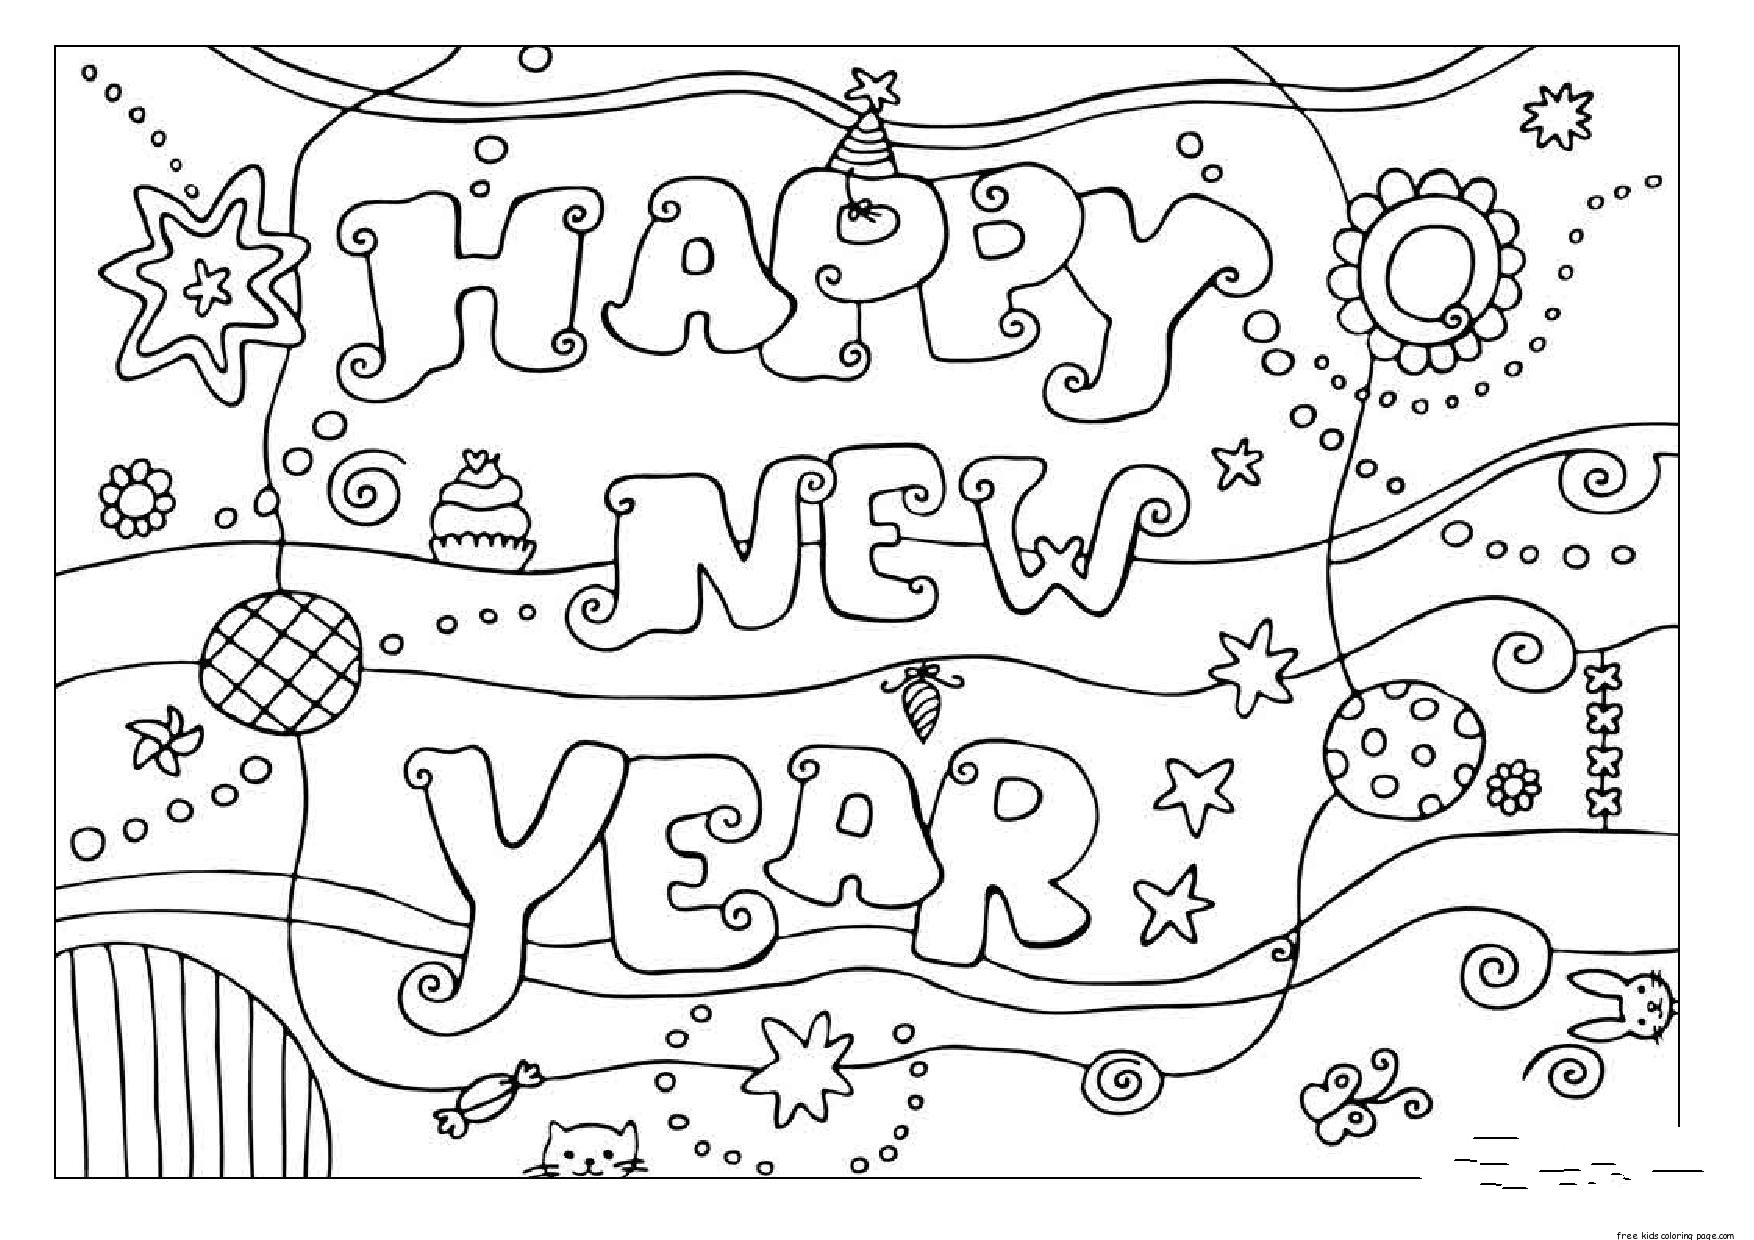 printable-coloring-pages-happy-new-year-2016free-printable-coloring